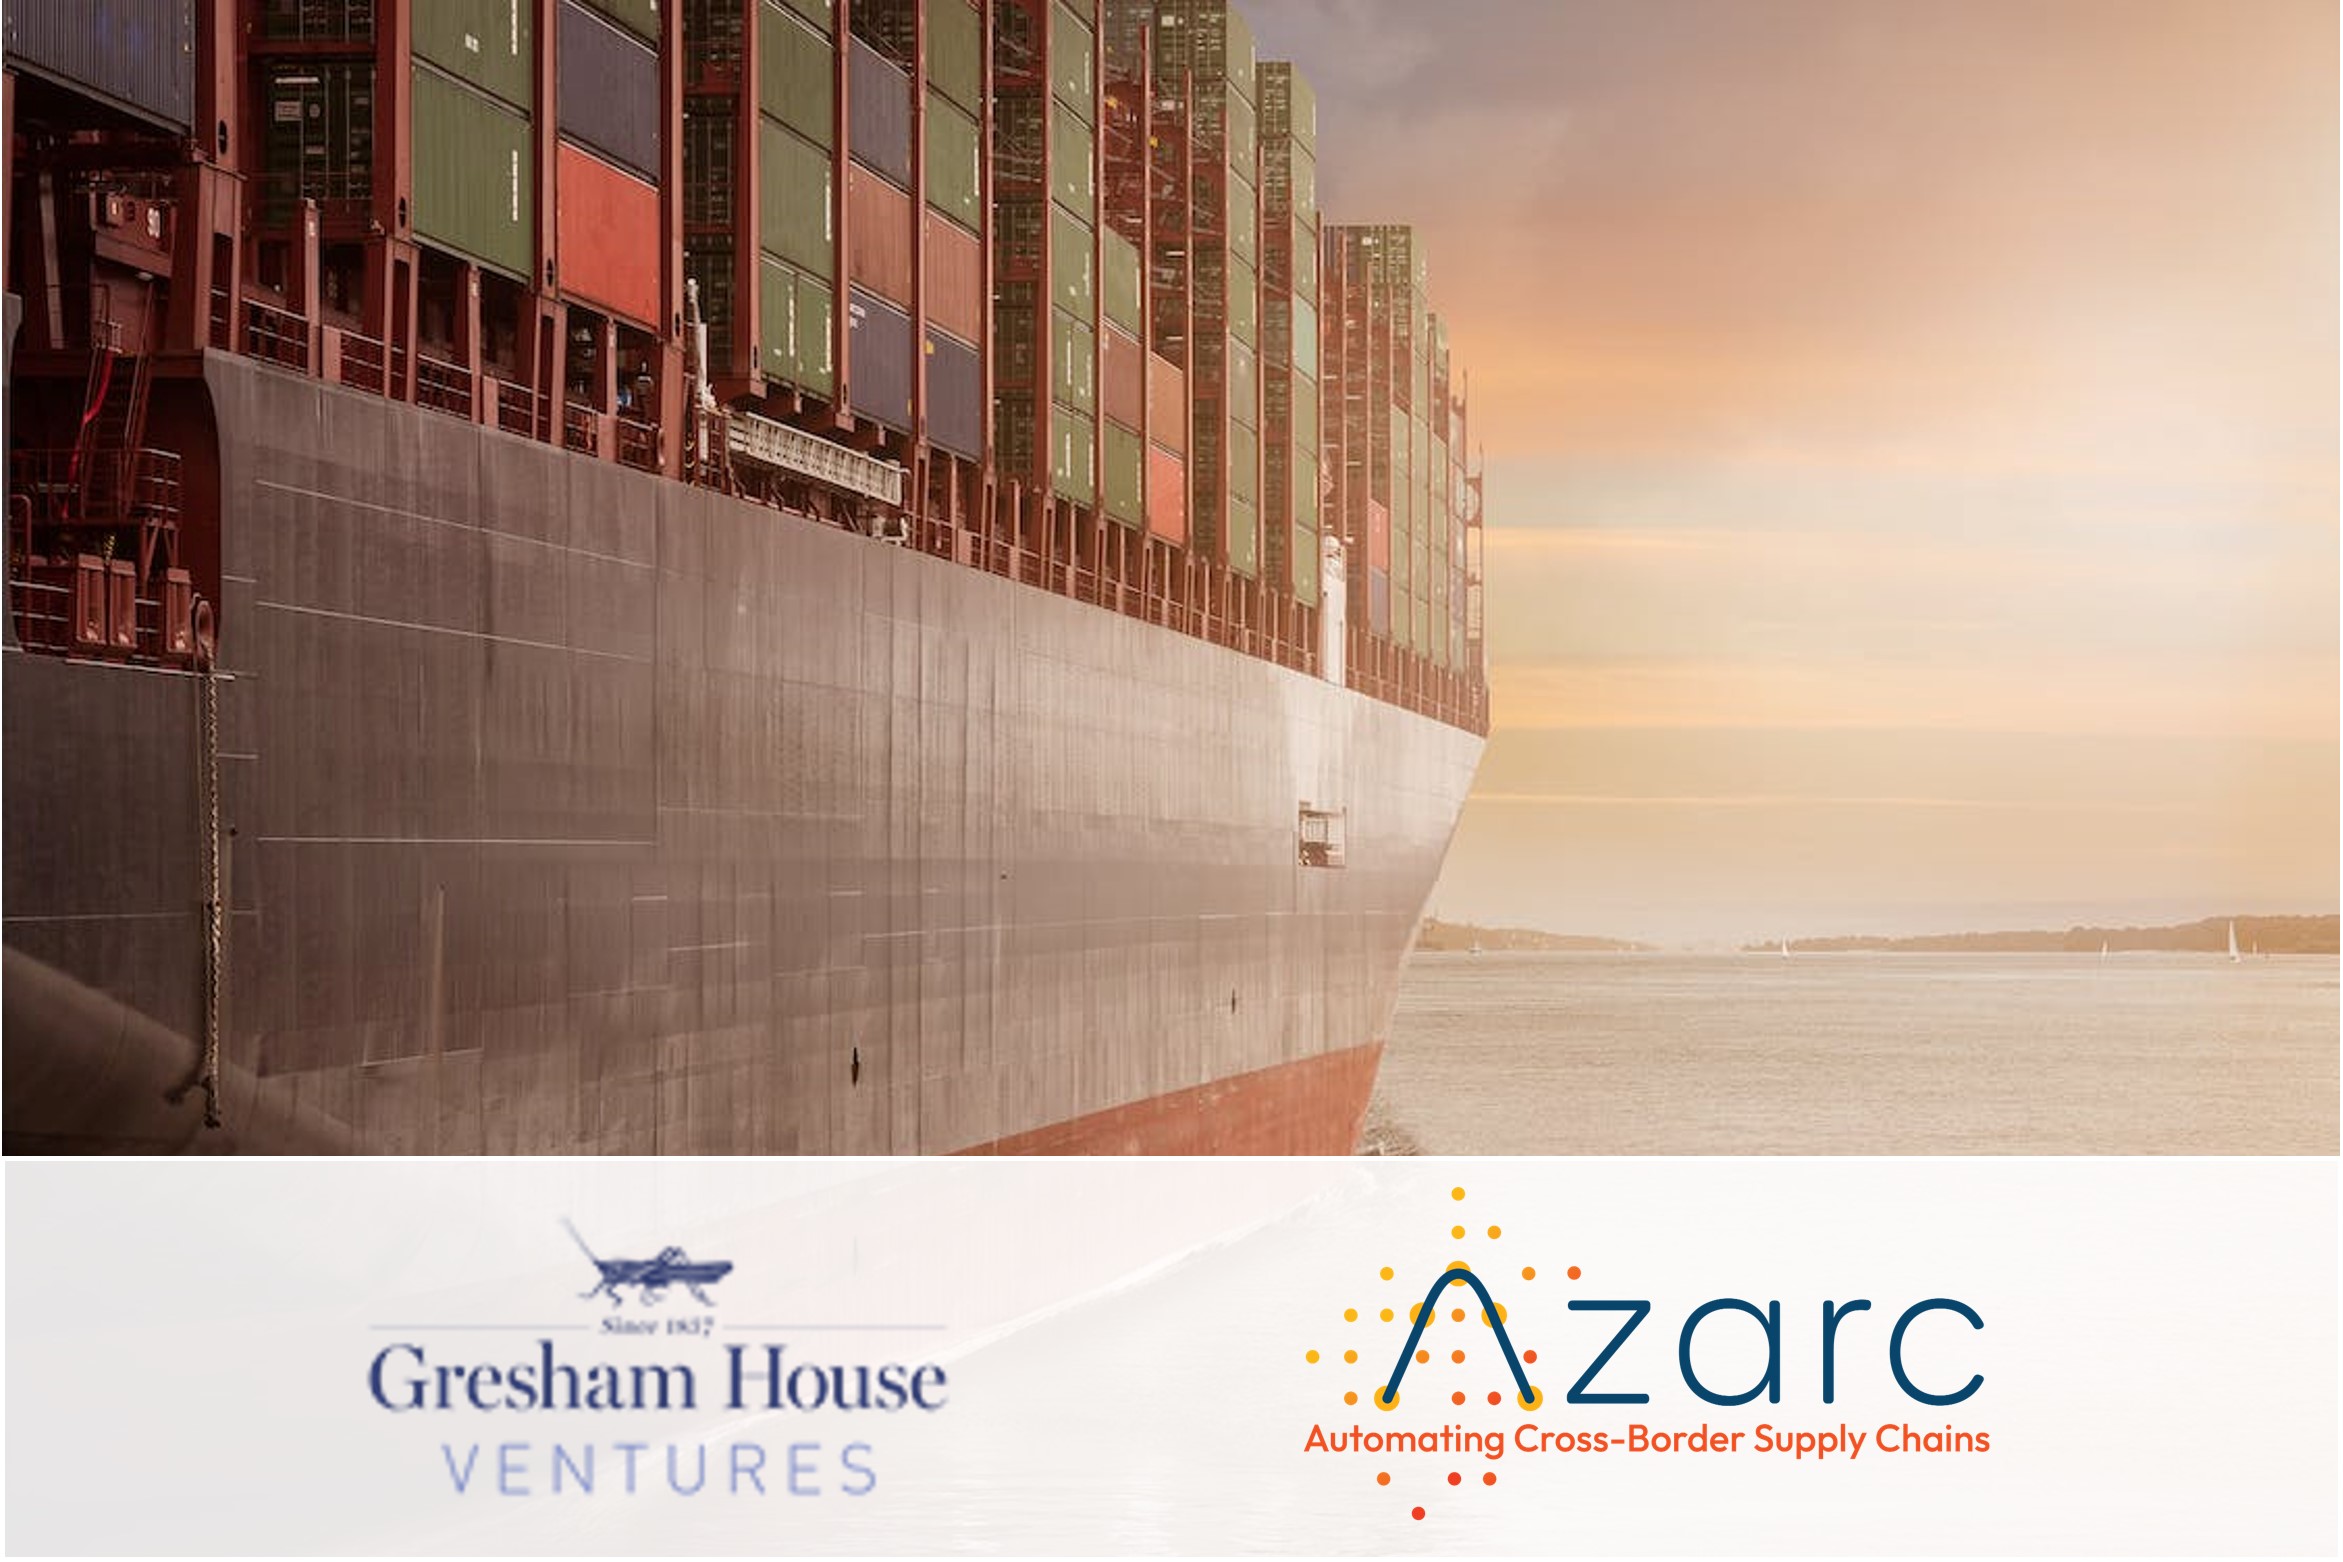 Luminii provides CDD support to Gresham House Ventures on their investment in Azarc